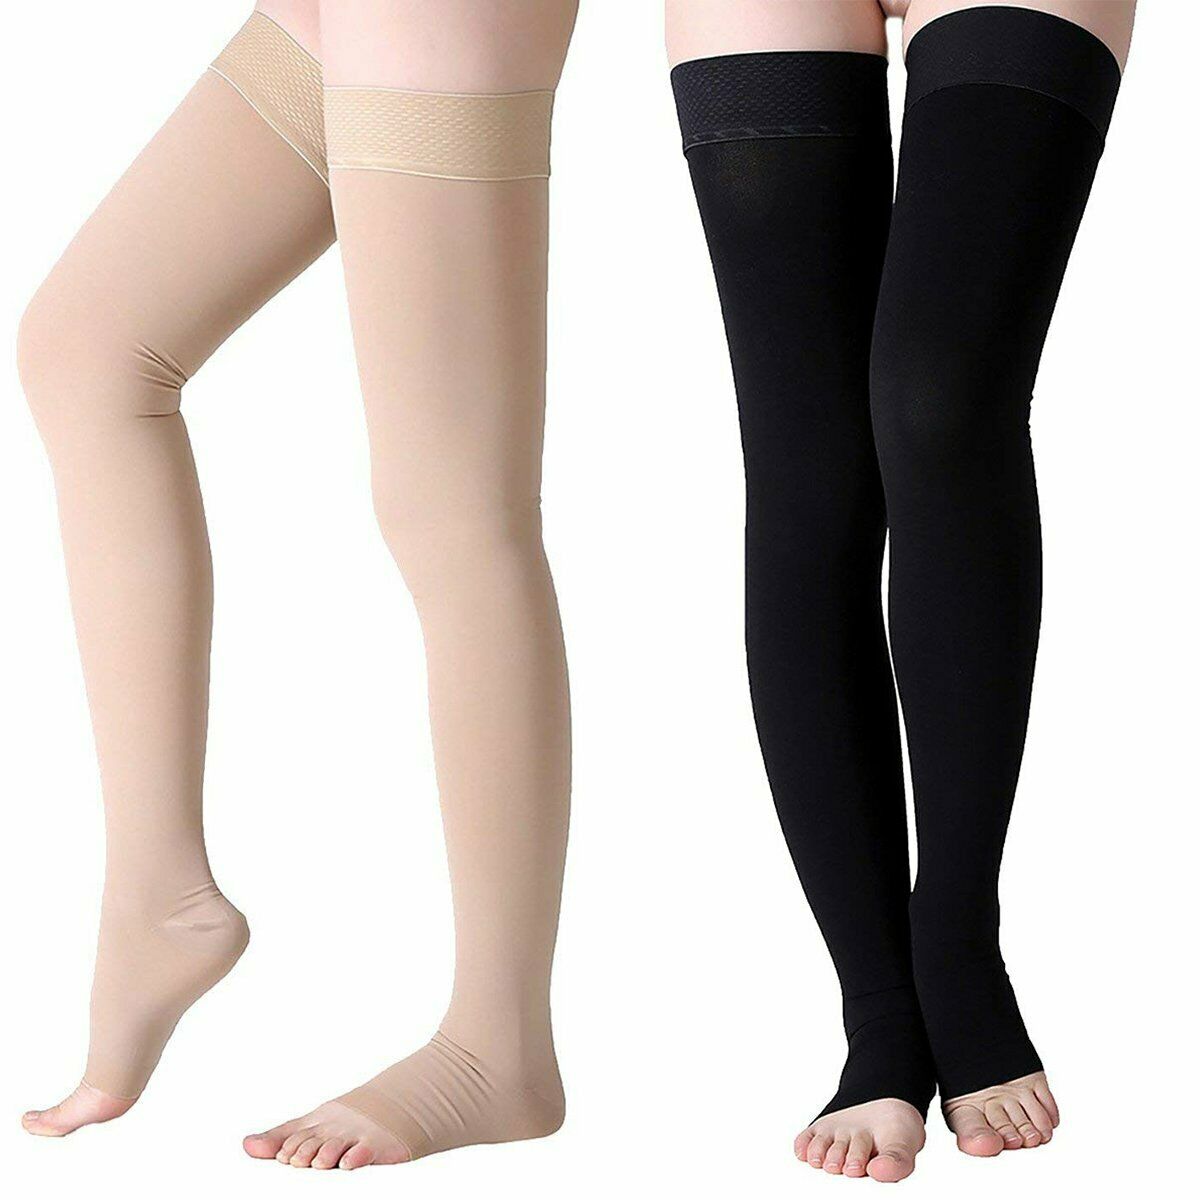 compression stockings thigh high 20 30